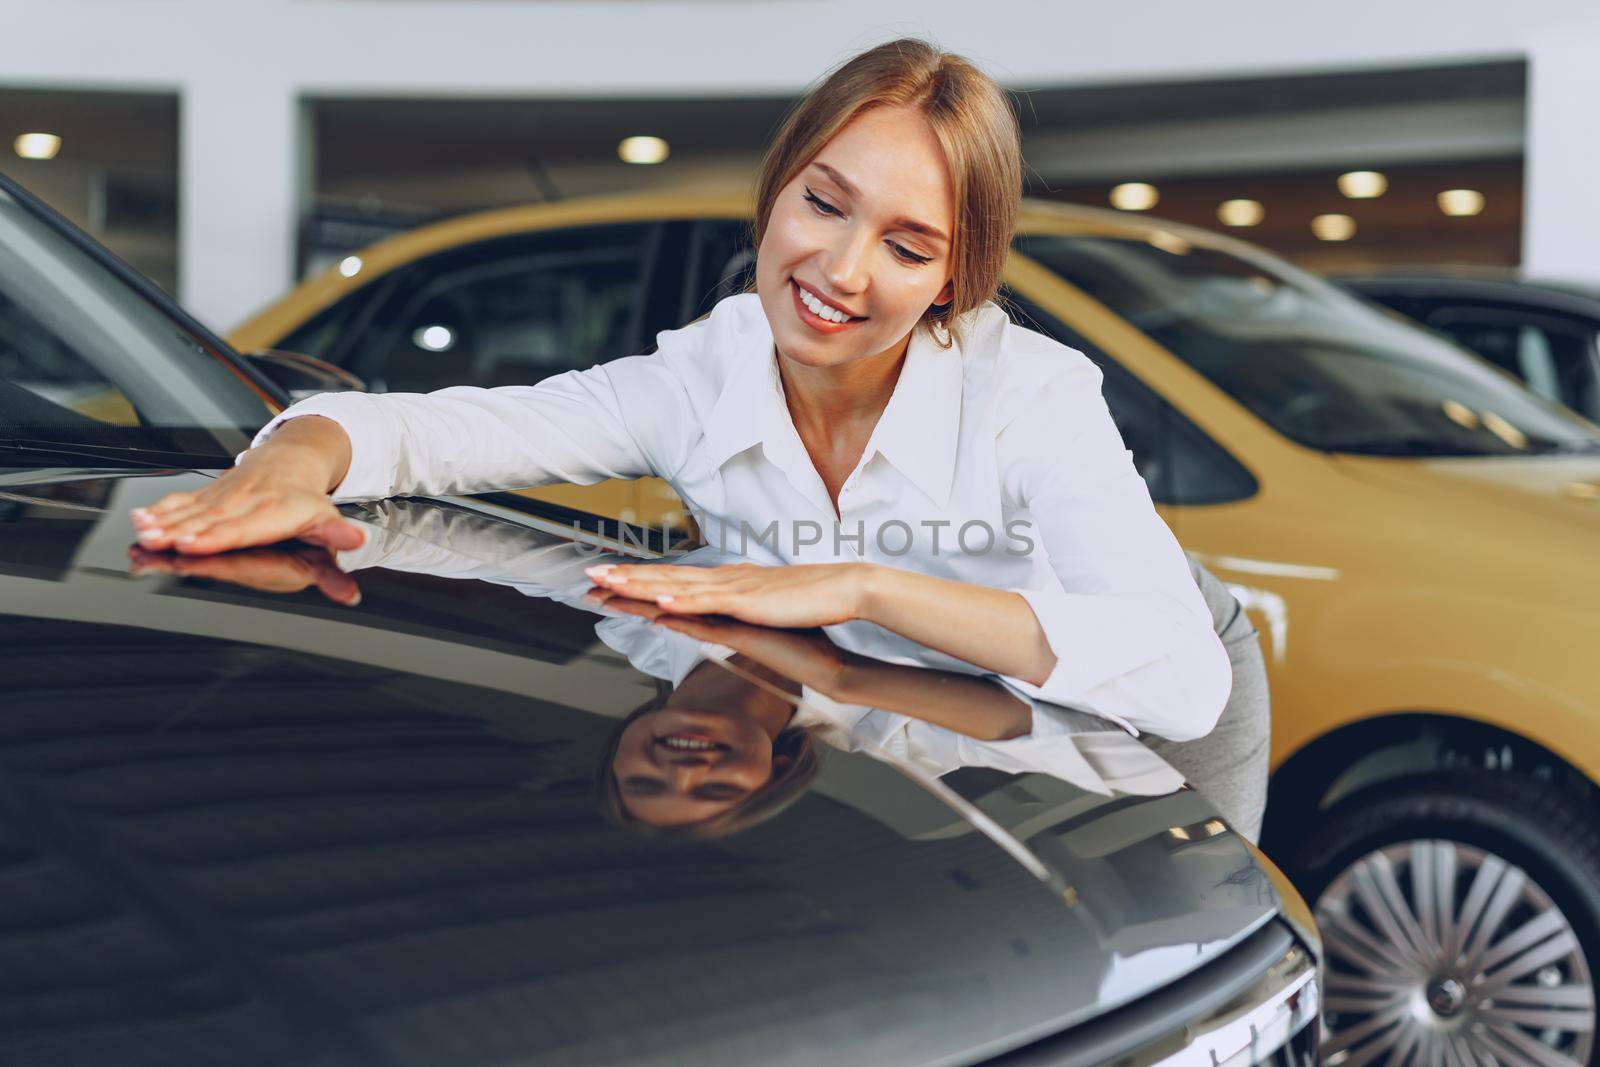 Beautiful young woman touching her new car with pleasure and joy